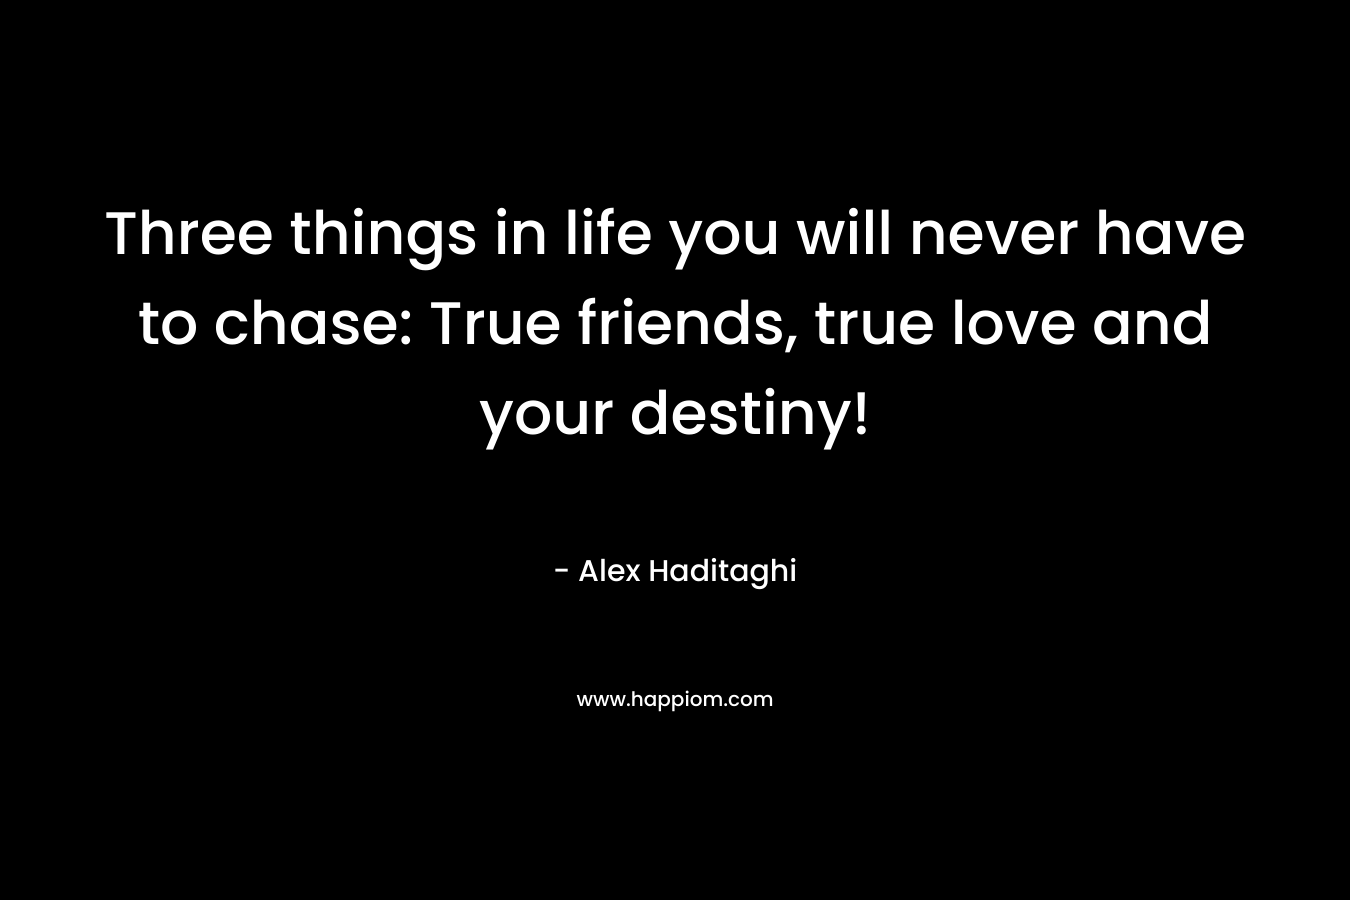 Three things in life you will never have to chase: True friends, true love and your destiny!